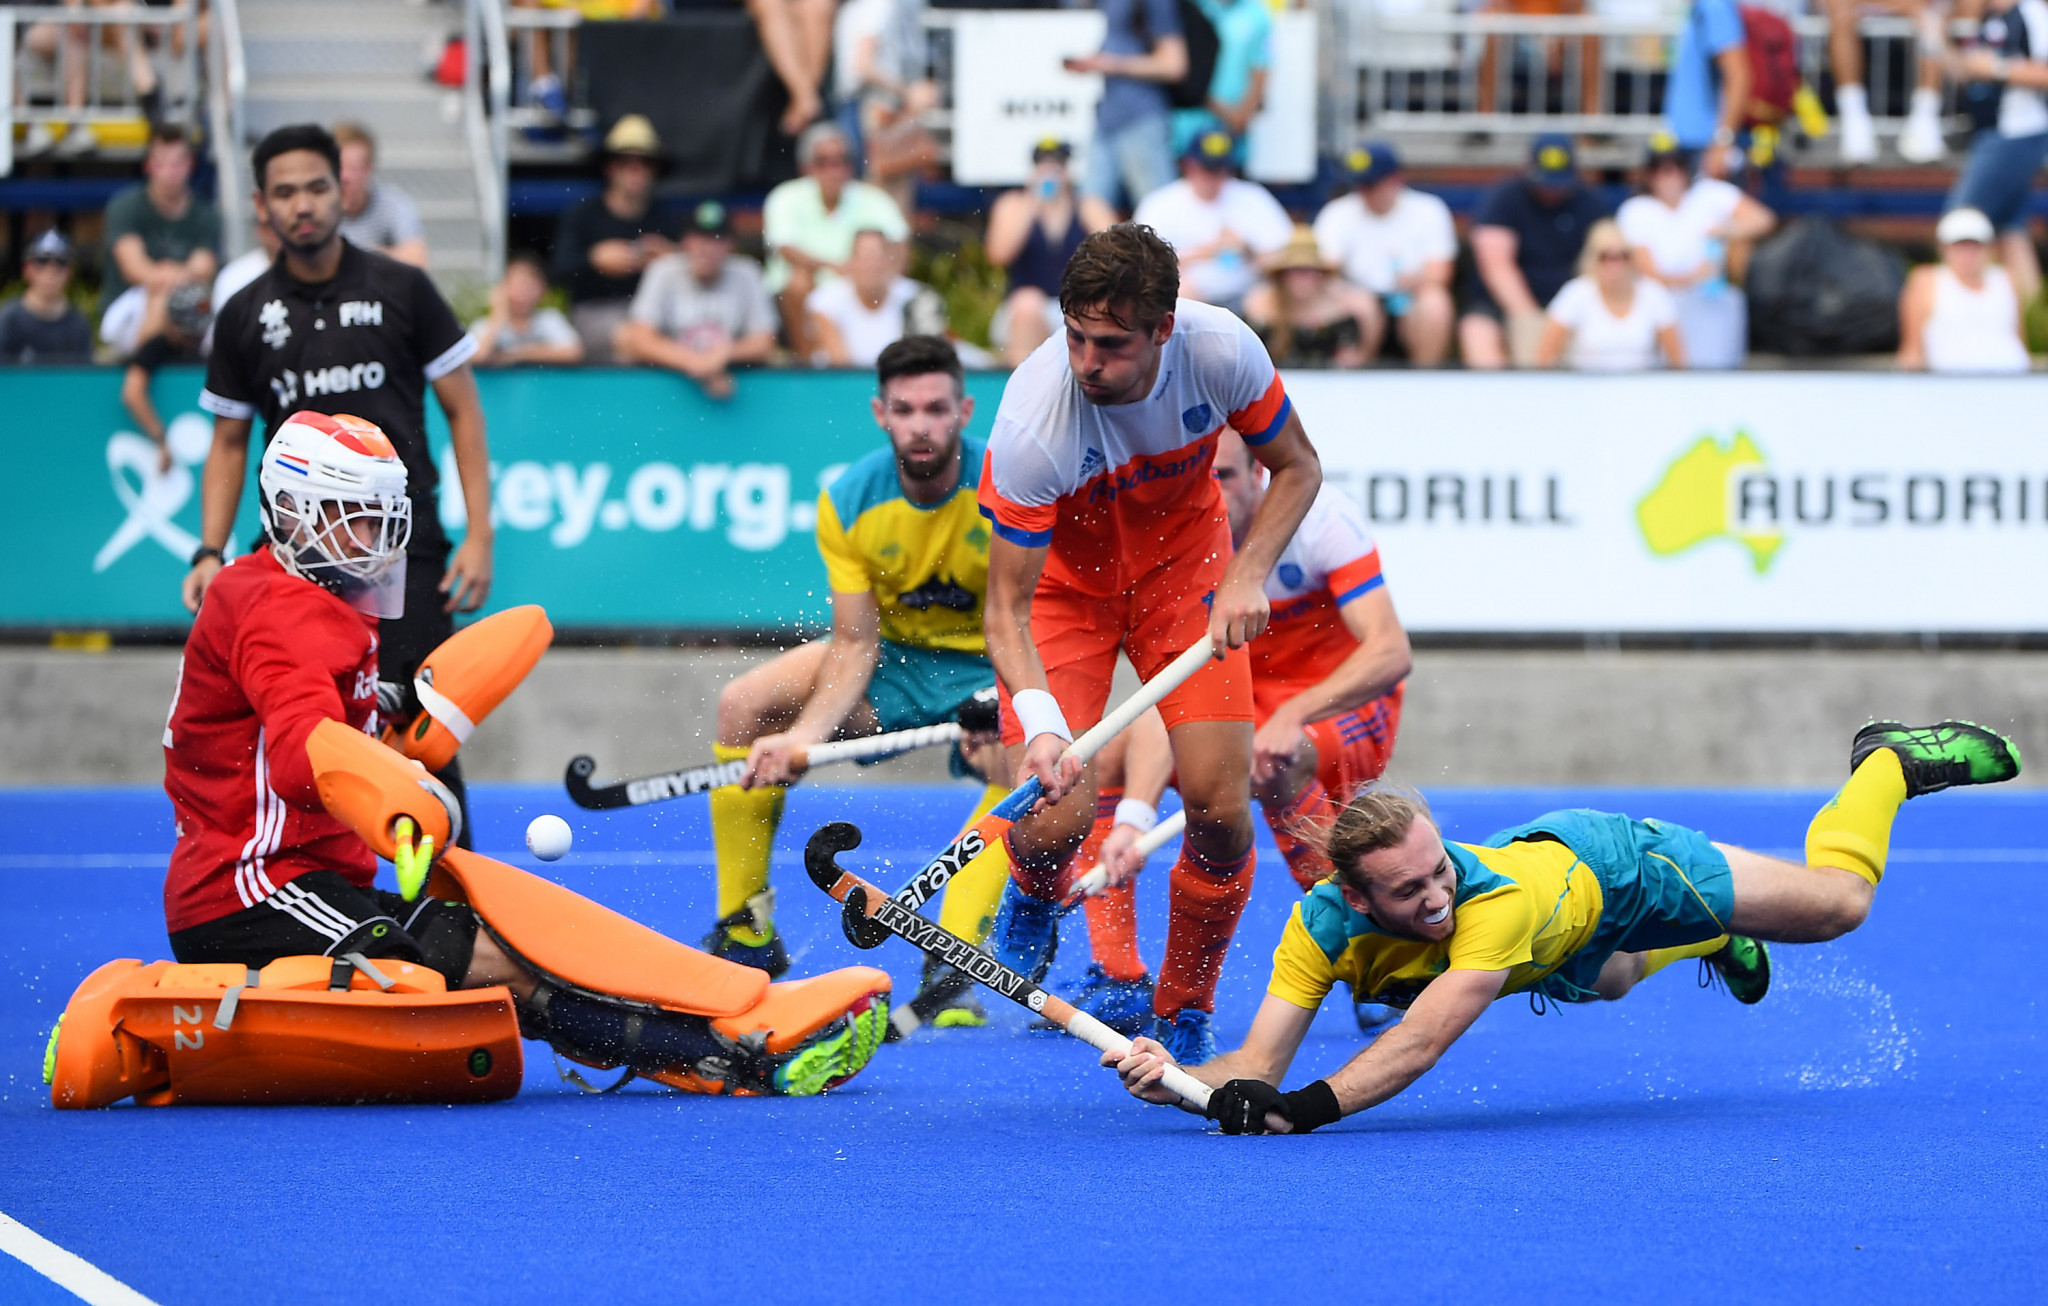 Netherlands claim dramatic win over hosts Australia in men's FIH Pro League